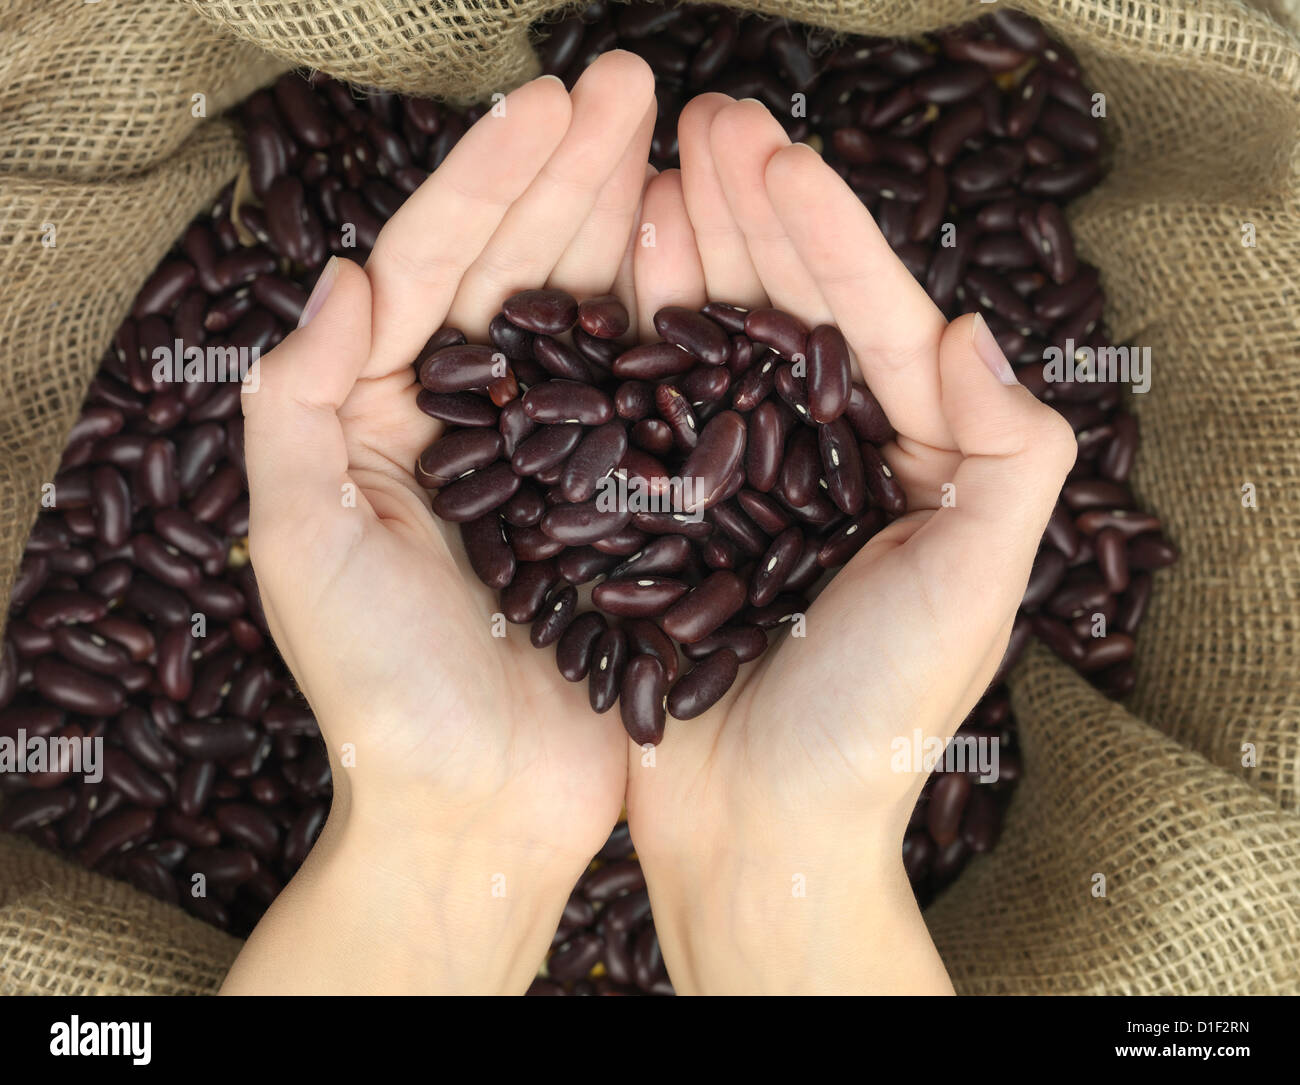 beans in heart shape held in hands over a raffia bag Stock Photo